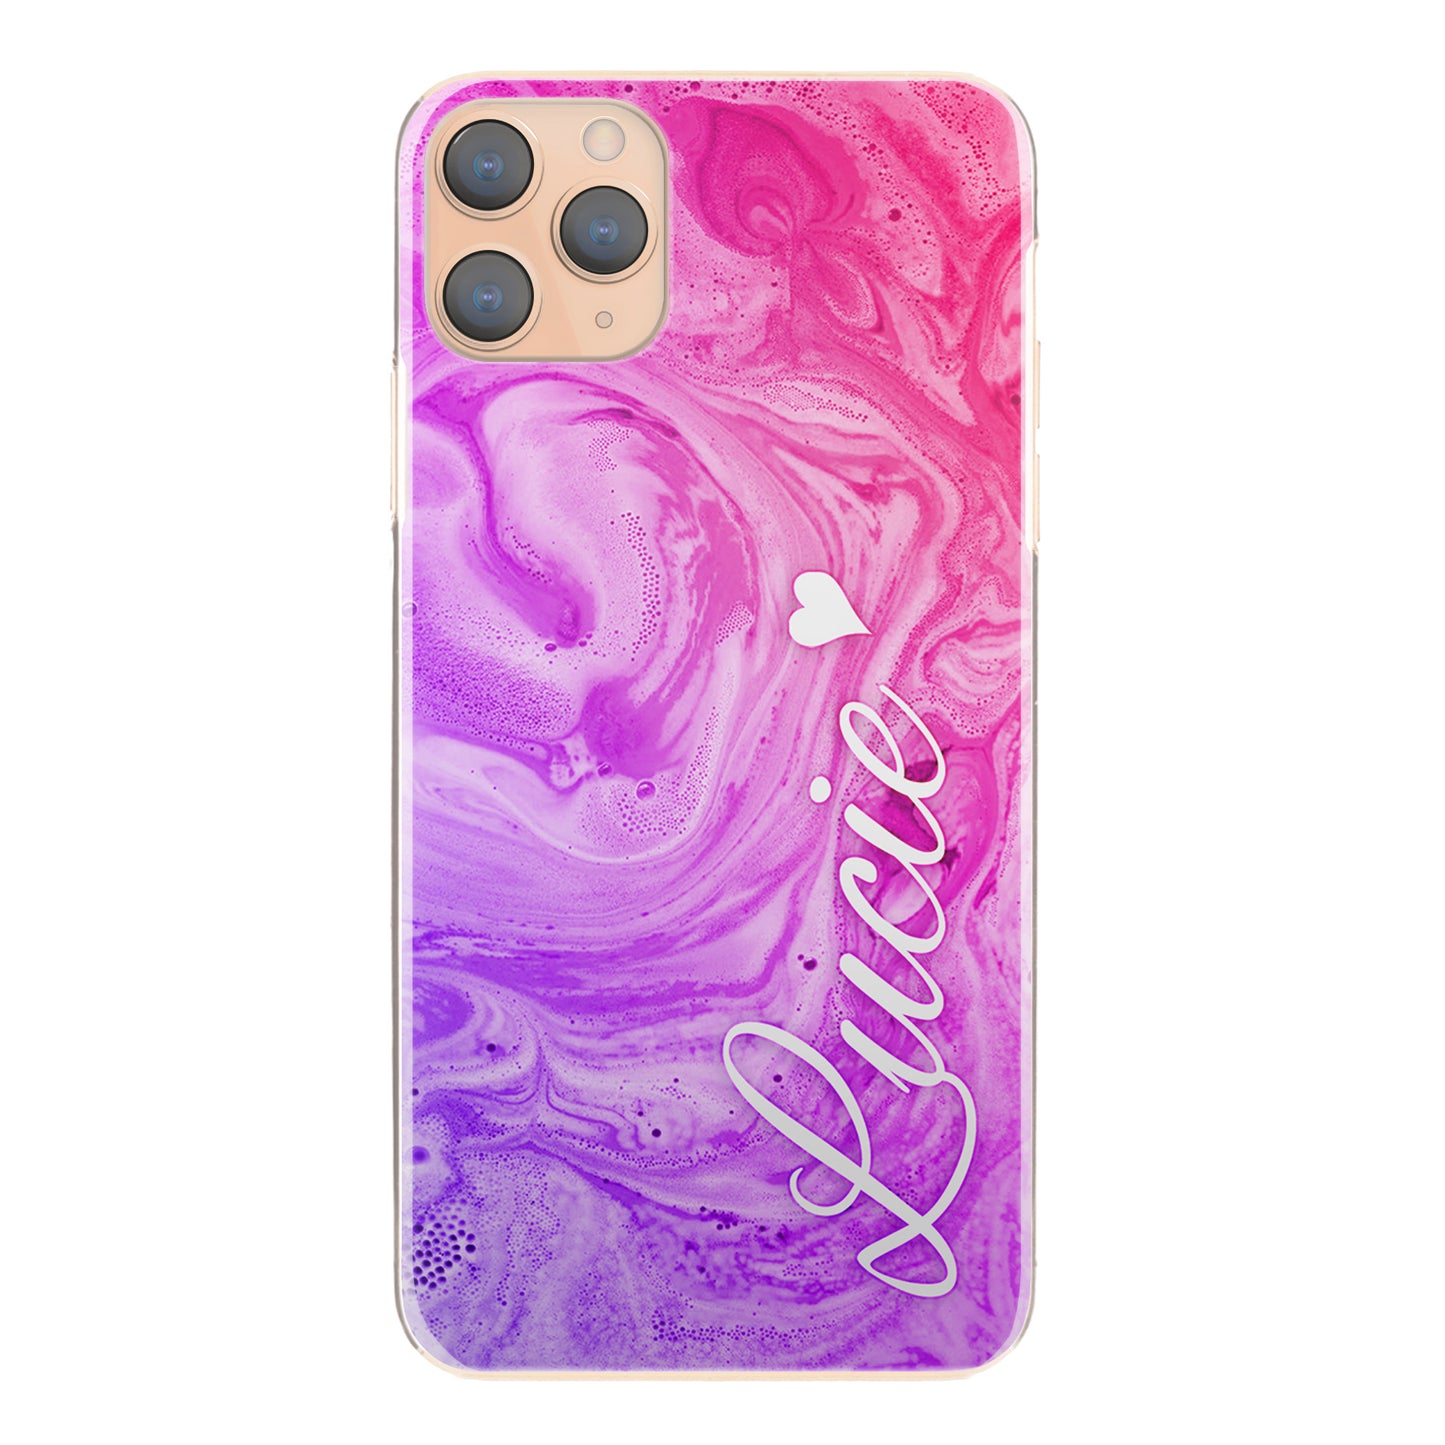 Personalised OnePlus Phone Hard Case with Heart Accented Text on Purple Pink Gradient Swirled Marble